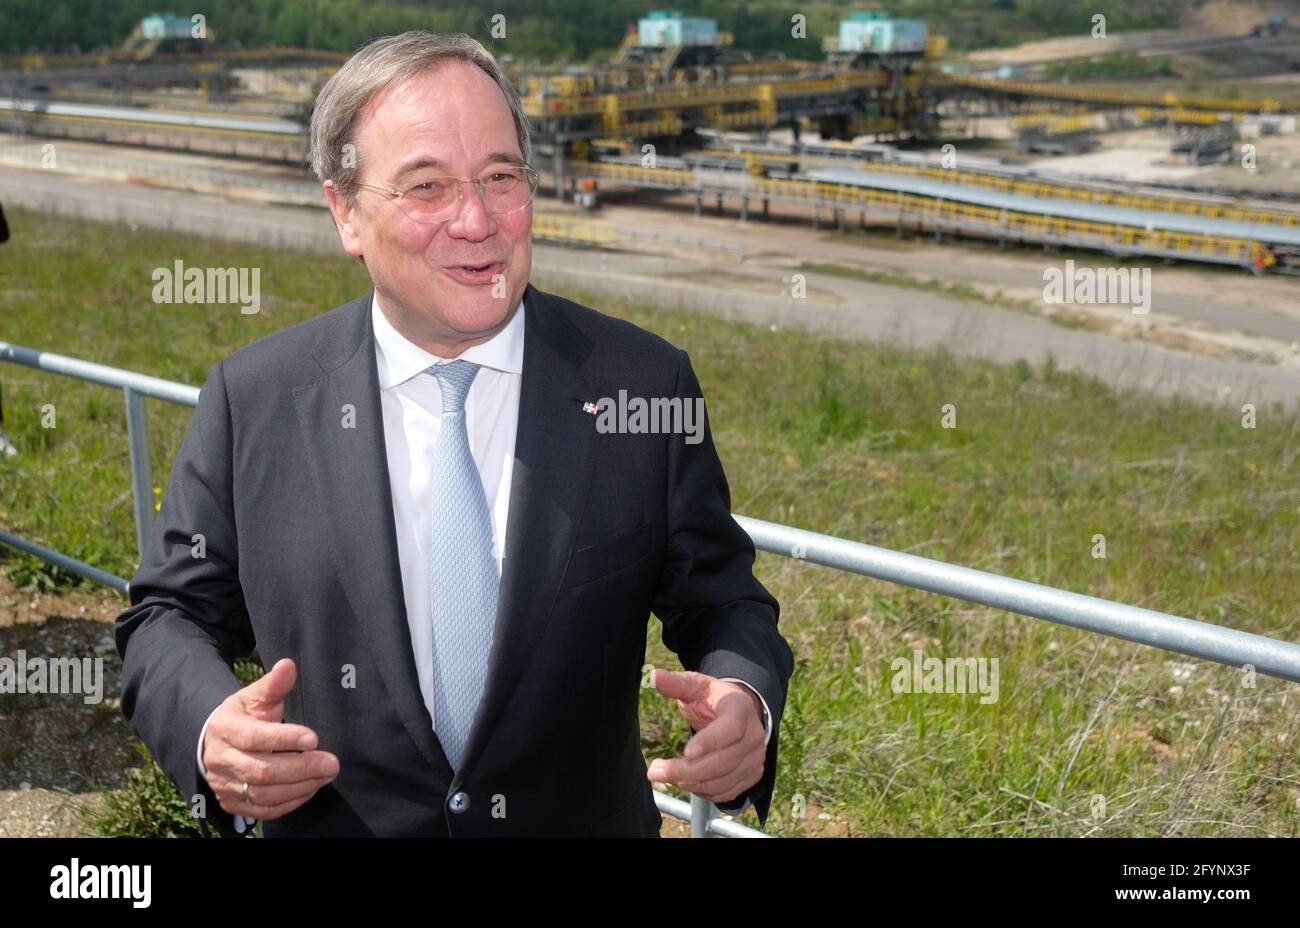 Profen, Germany. 29th May, 2021. Armin Laschet (CDU), Minister President of North Rhine-Westphalia and candidate for the chancellorship of the CDU/CSU, stands at an open-cast lignite mine. In Saxony-Anhalt, a new state parliament will be elected on 06.06.2021. Credit: Sebastian Willnow/dpa-Zentralbild/dpa/Alamy Live News Stock Photo